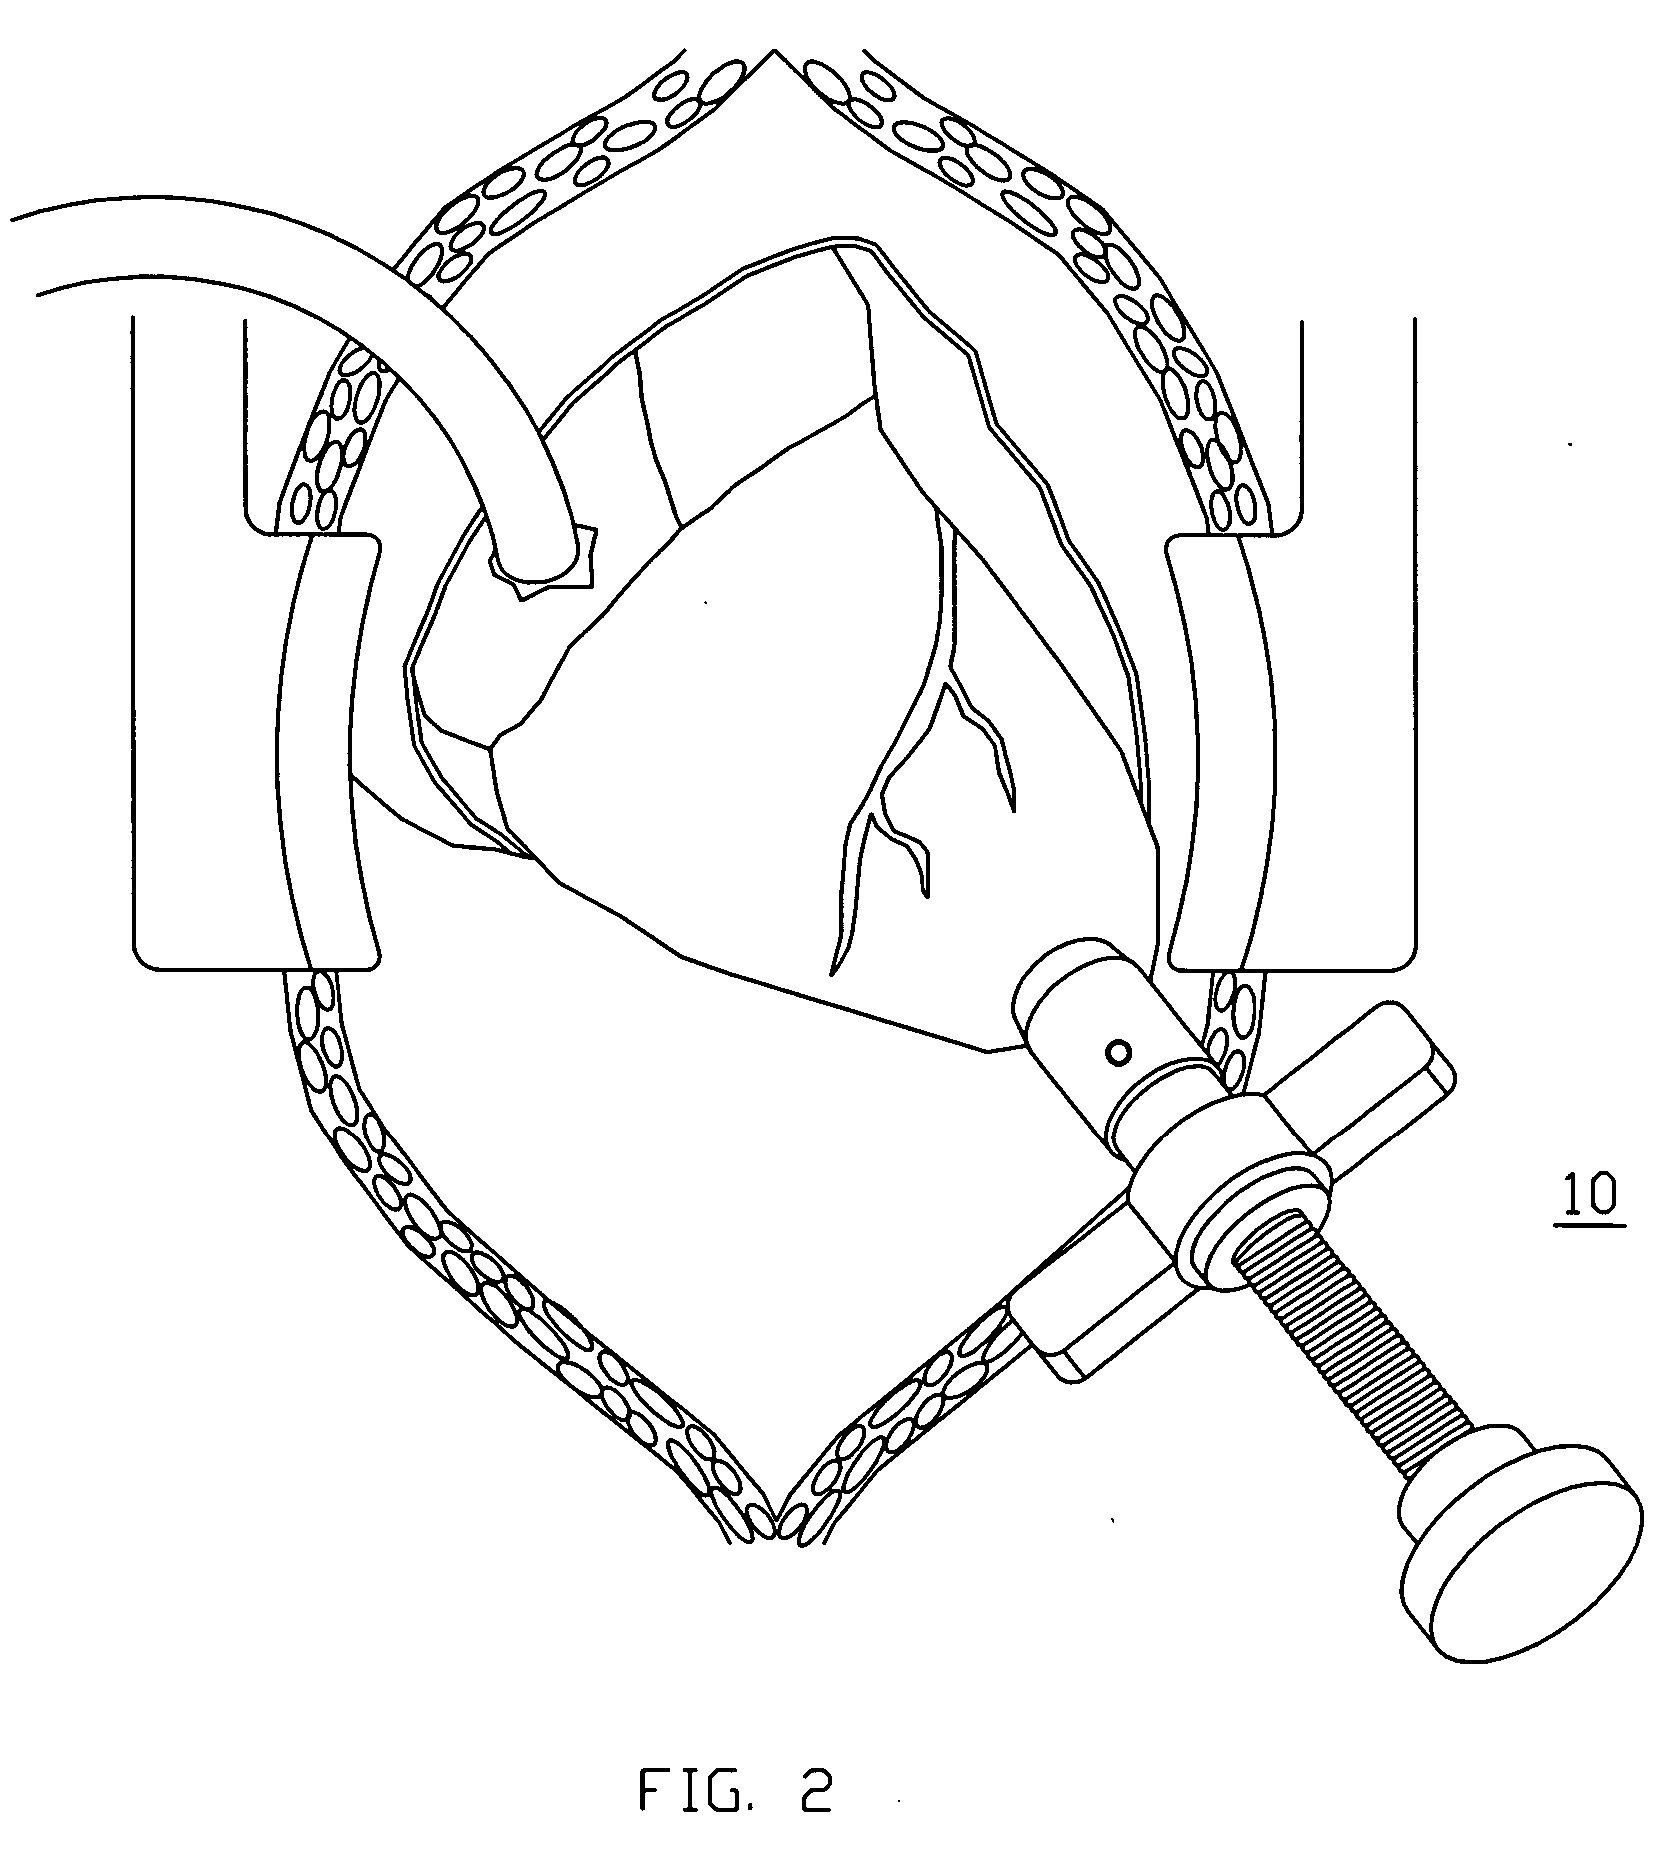 Method and apparatus for trephinating body vessels and hollow organ walls